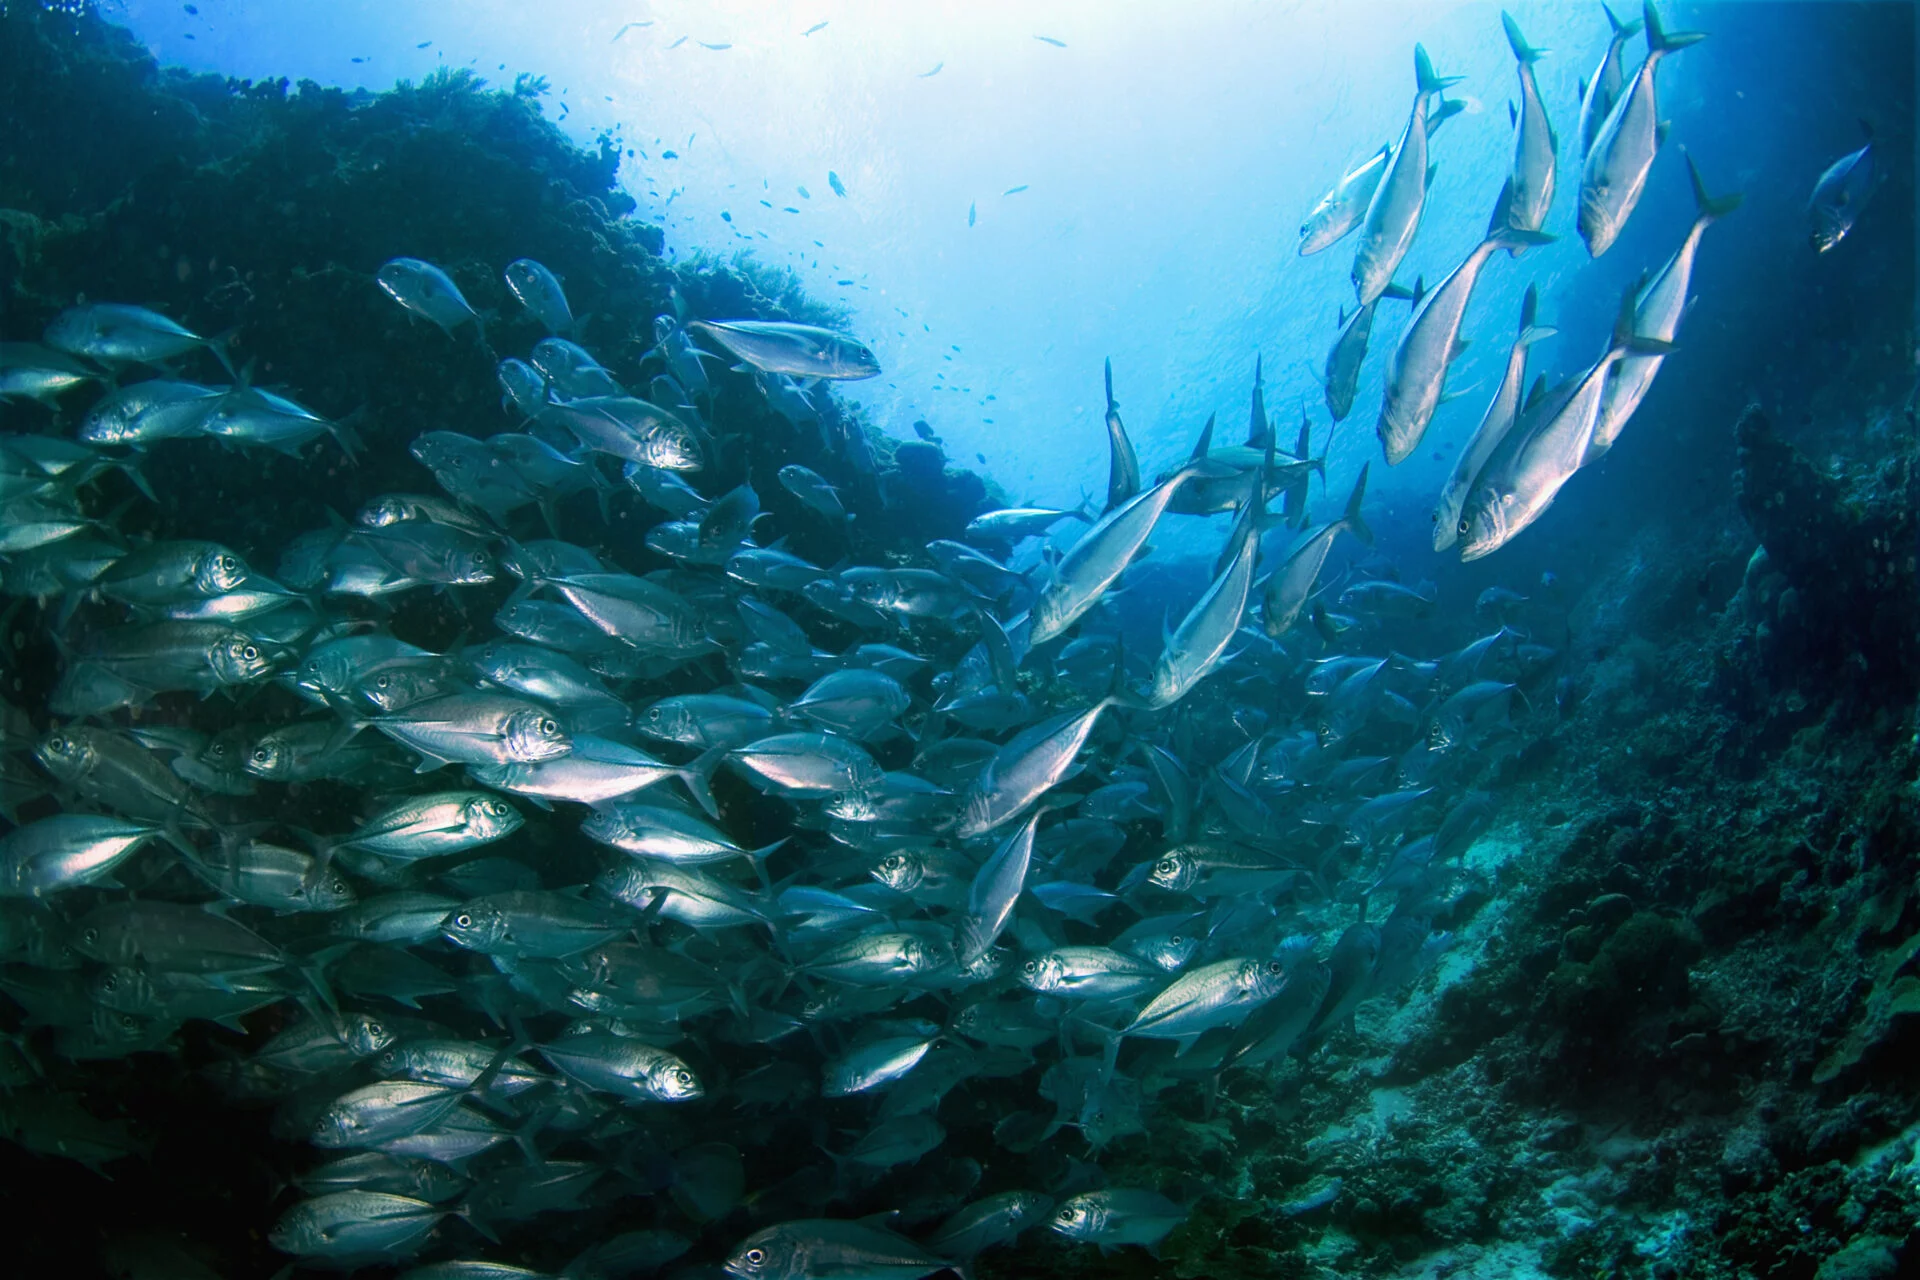 A large school of silver tuna swimming above a tropical coral reef on a scuba diving adventure